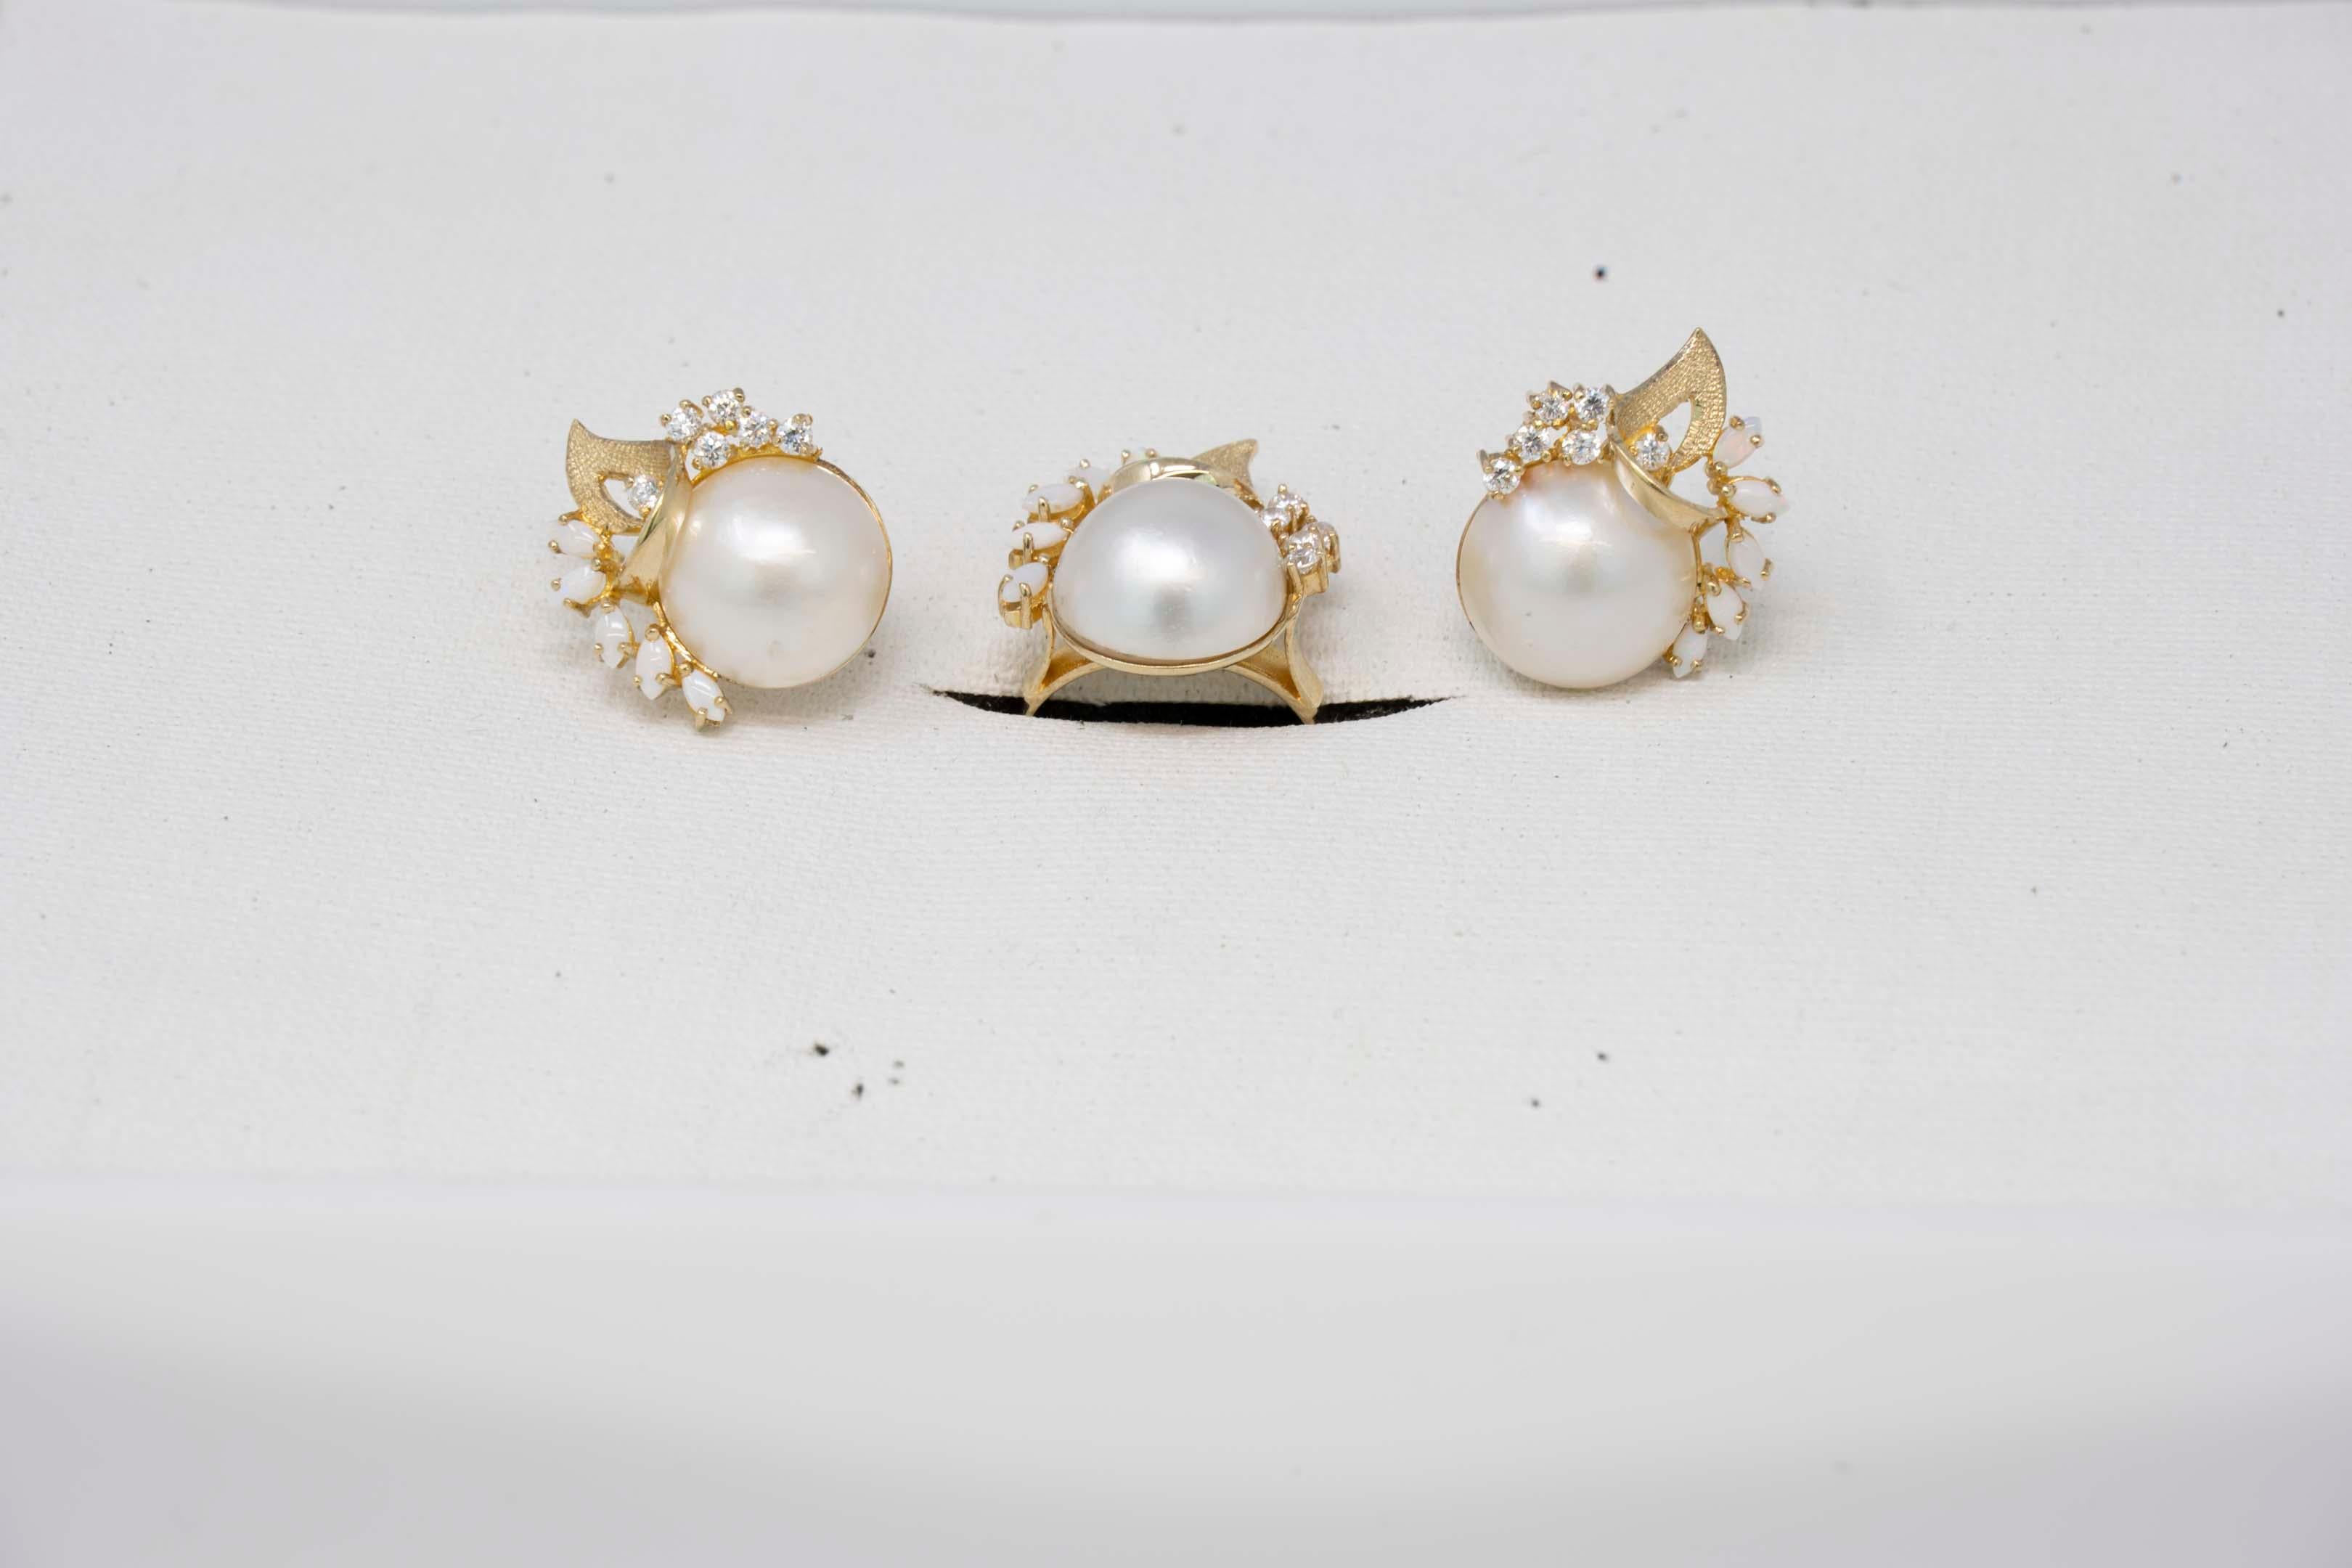 14k yellow gold set of ladies ring & earrings with 14mm Mabe pearl, 6 diamonds each and 5 opal gemstones each. Ring is size 7.75. The earrings has the omega clip, stamped 14k GA. In good condition.
